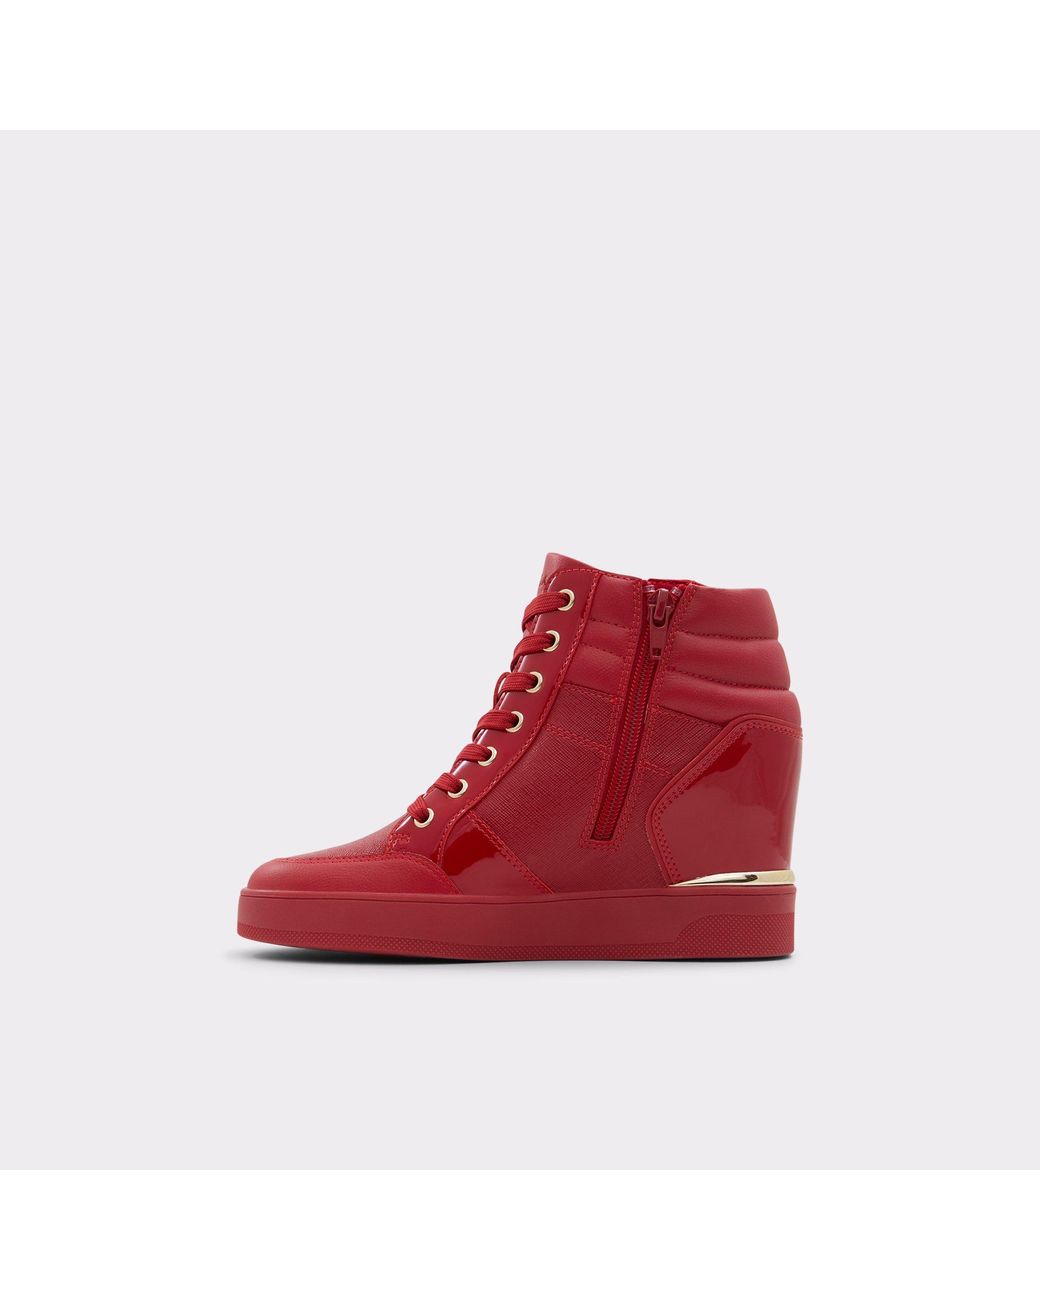 Cool-Mickey Men's Red Sneakers | Aldo Shoes